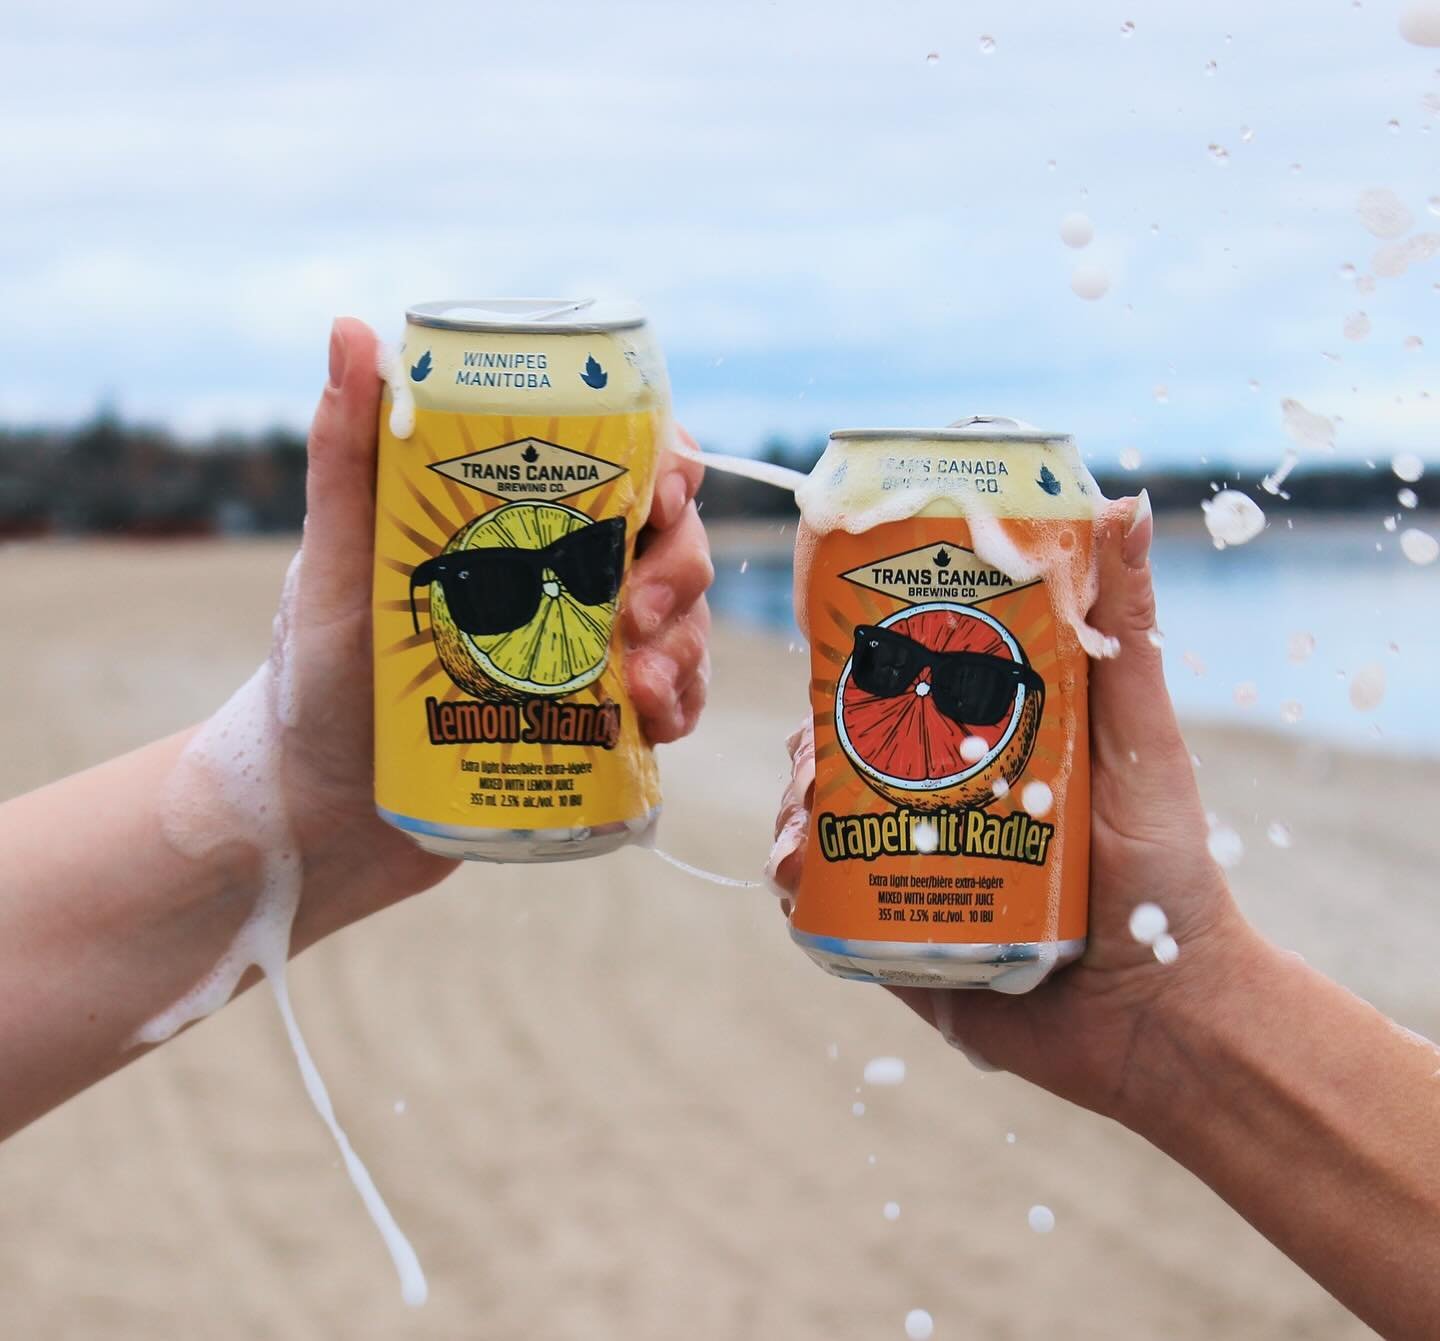 Crack open the sound of summer with our new Summer Sipper 8-packs!

Featuring four 355ml cans of each Summer Sipper flavour:

🍋Lemon Shandy: A blend of light lager and lemon juice, this shandy combines the tangy kick of citrus with subtle tartness, 